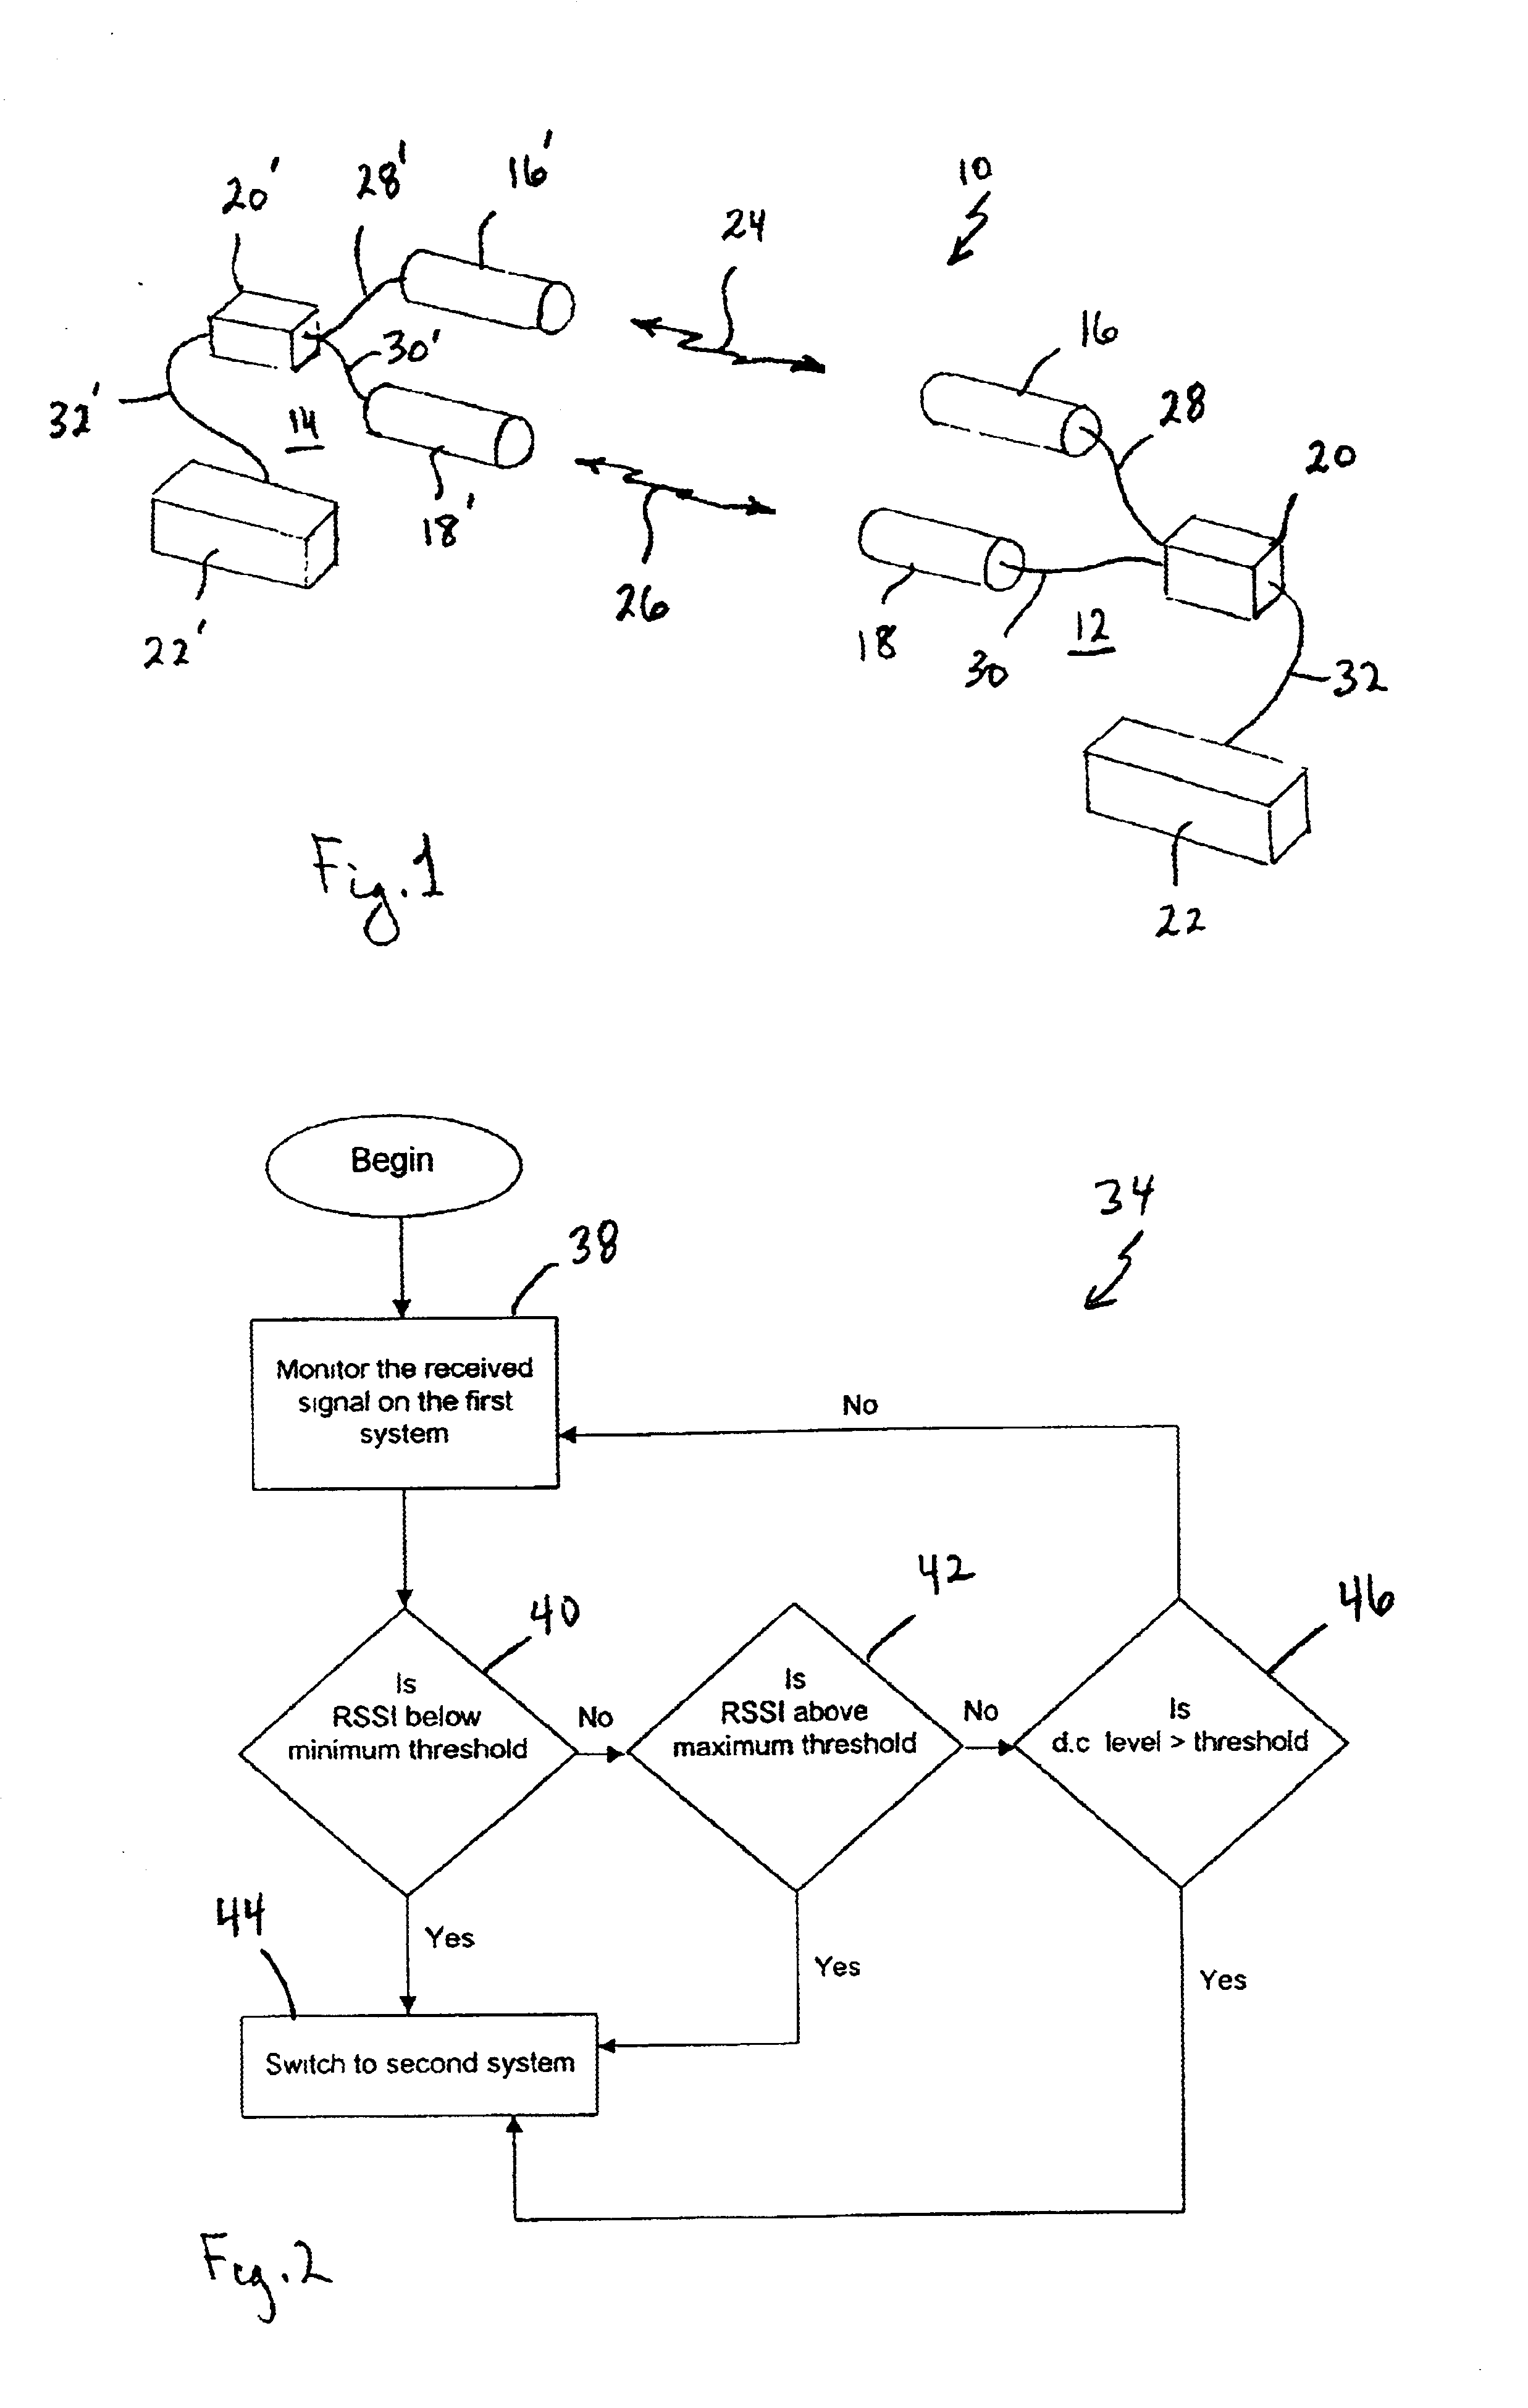 Optical communications system with back-up link